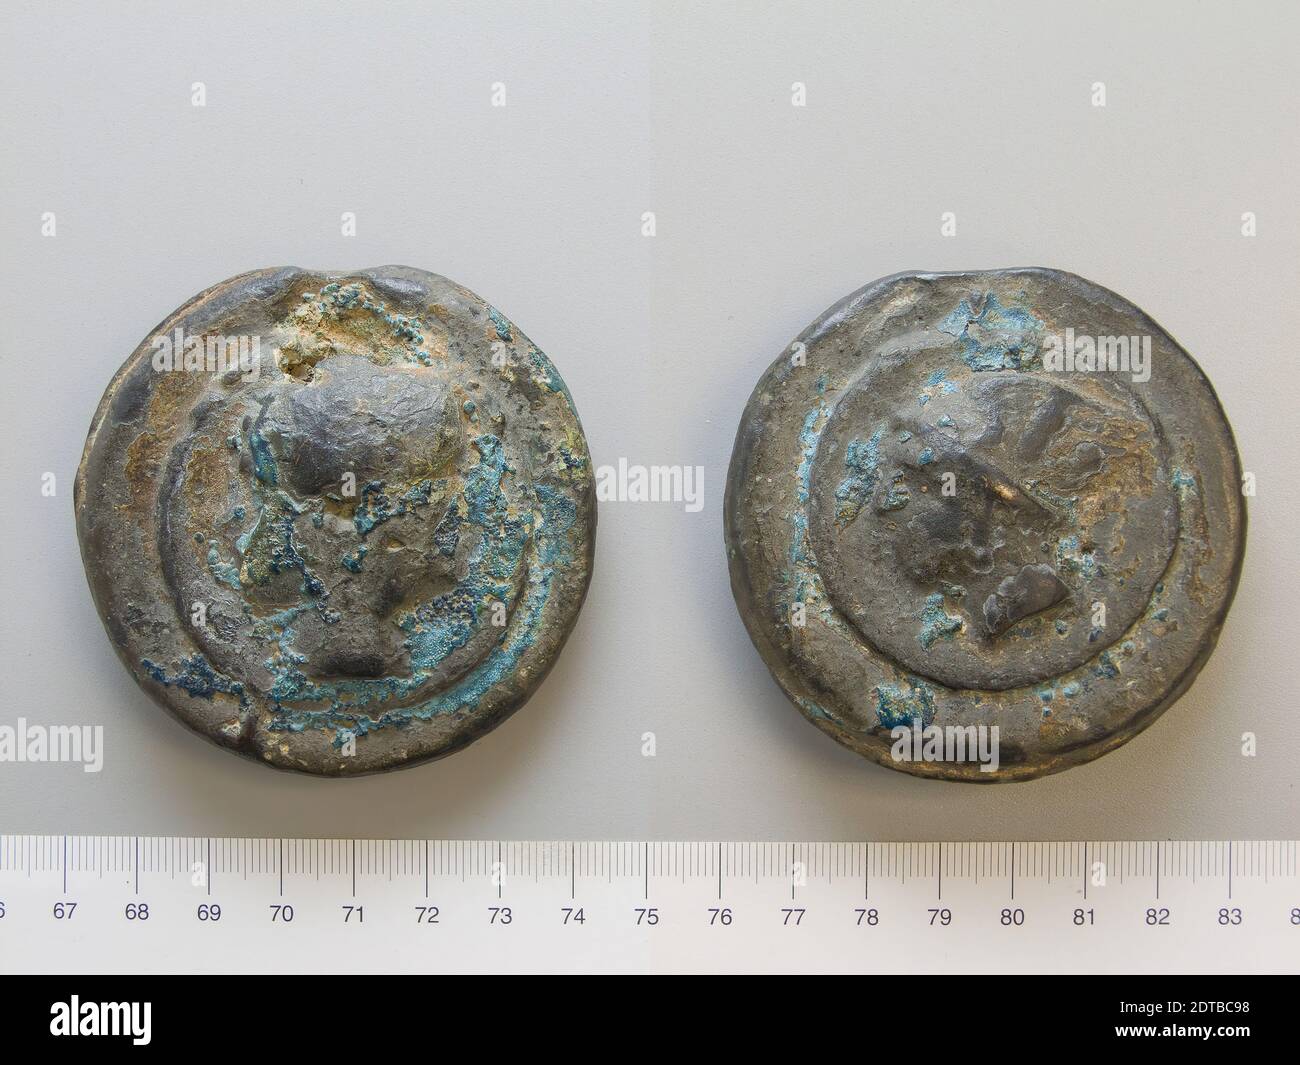 Mint: Rome, 1 As from Rome, 280–276 B.C., Copper, 292.07 g, 12:00, 69.4 mm, Made in Rome, Roman, 3rd century B.C., Numismatics Stock Photo